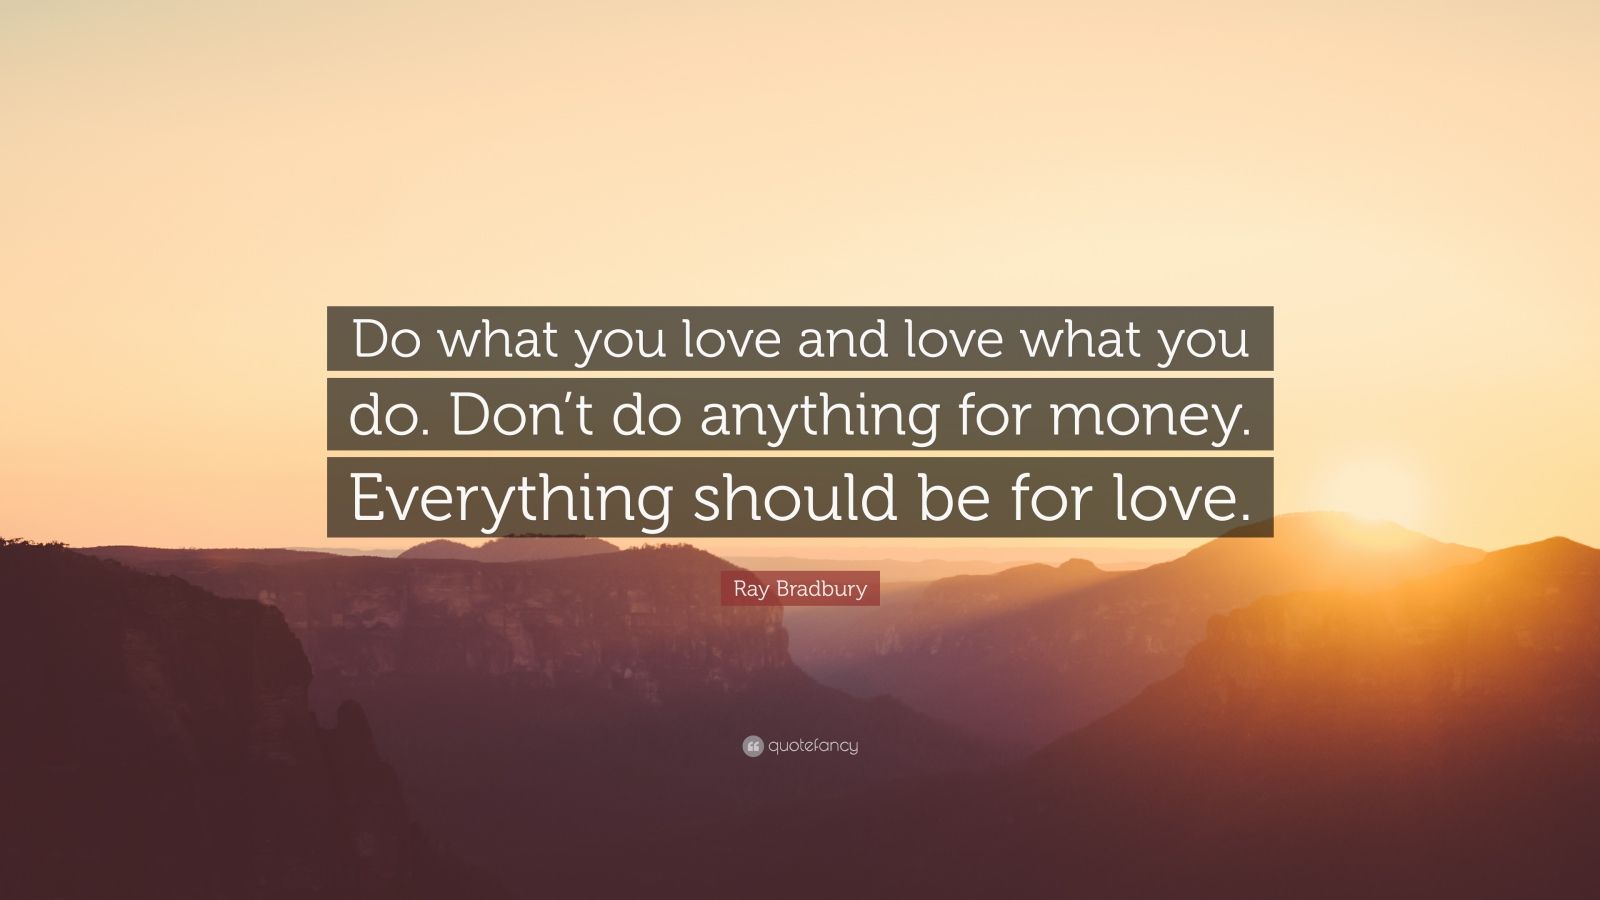 Ray Bradbury Quote: “Do what you love and love what you do. Don’t do ...